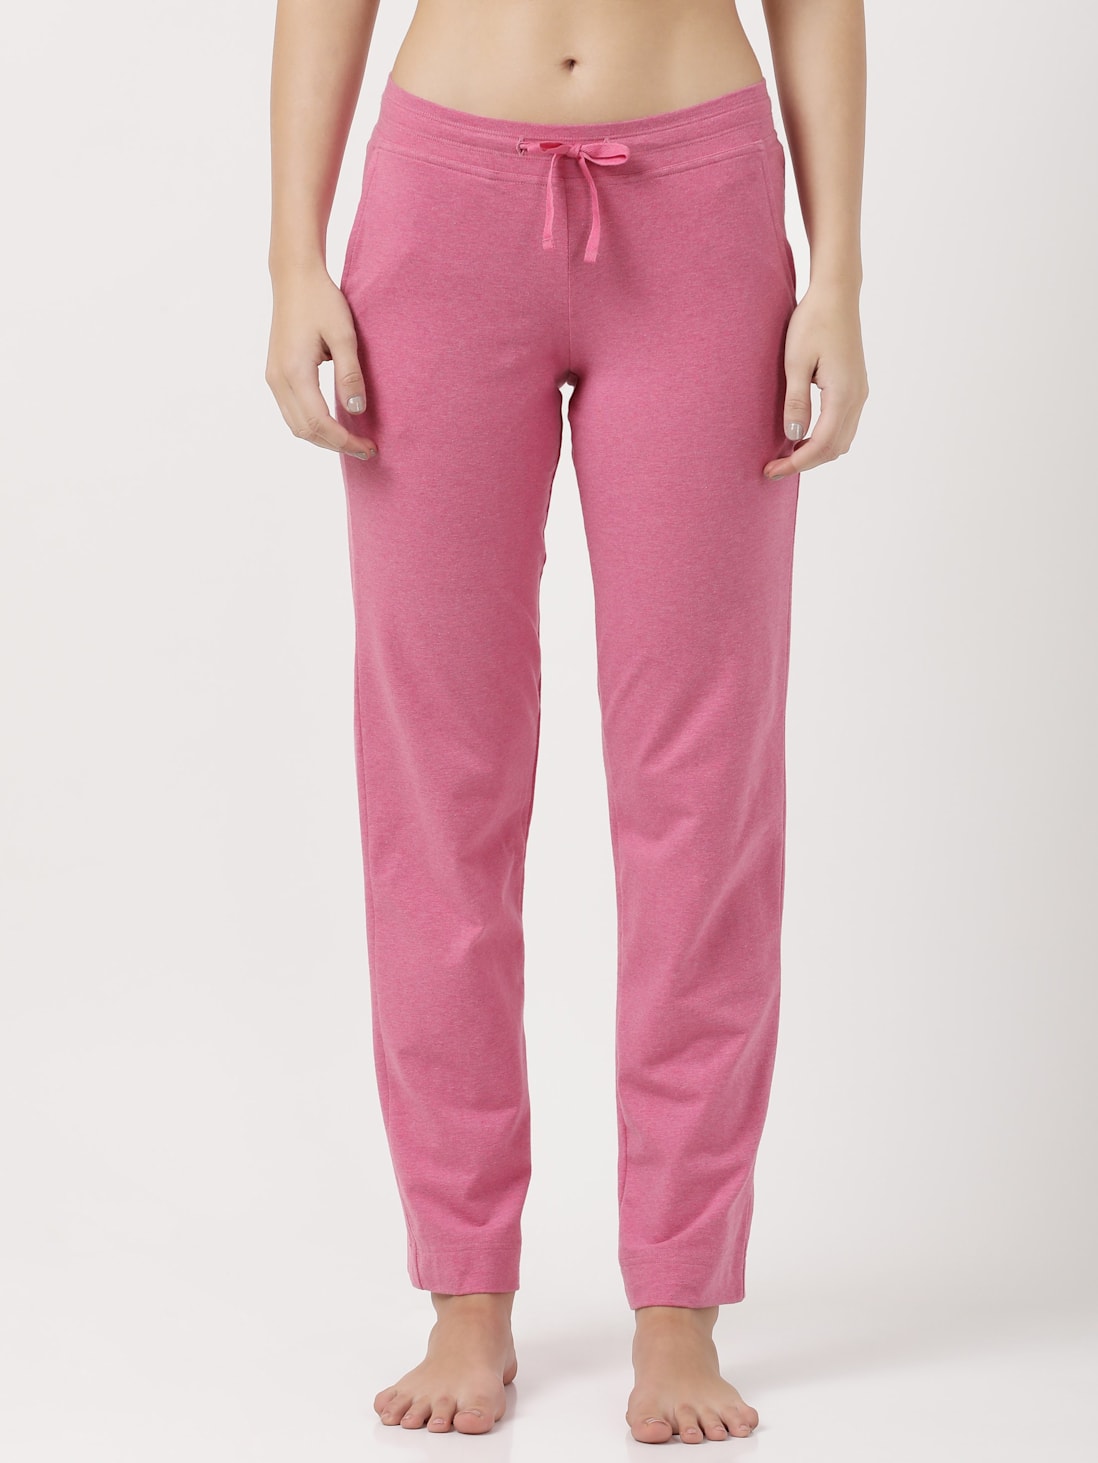 Buy Jockey Track Pants For Women Online In India At Best Price Offers |  Tata CLiQ